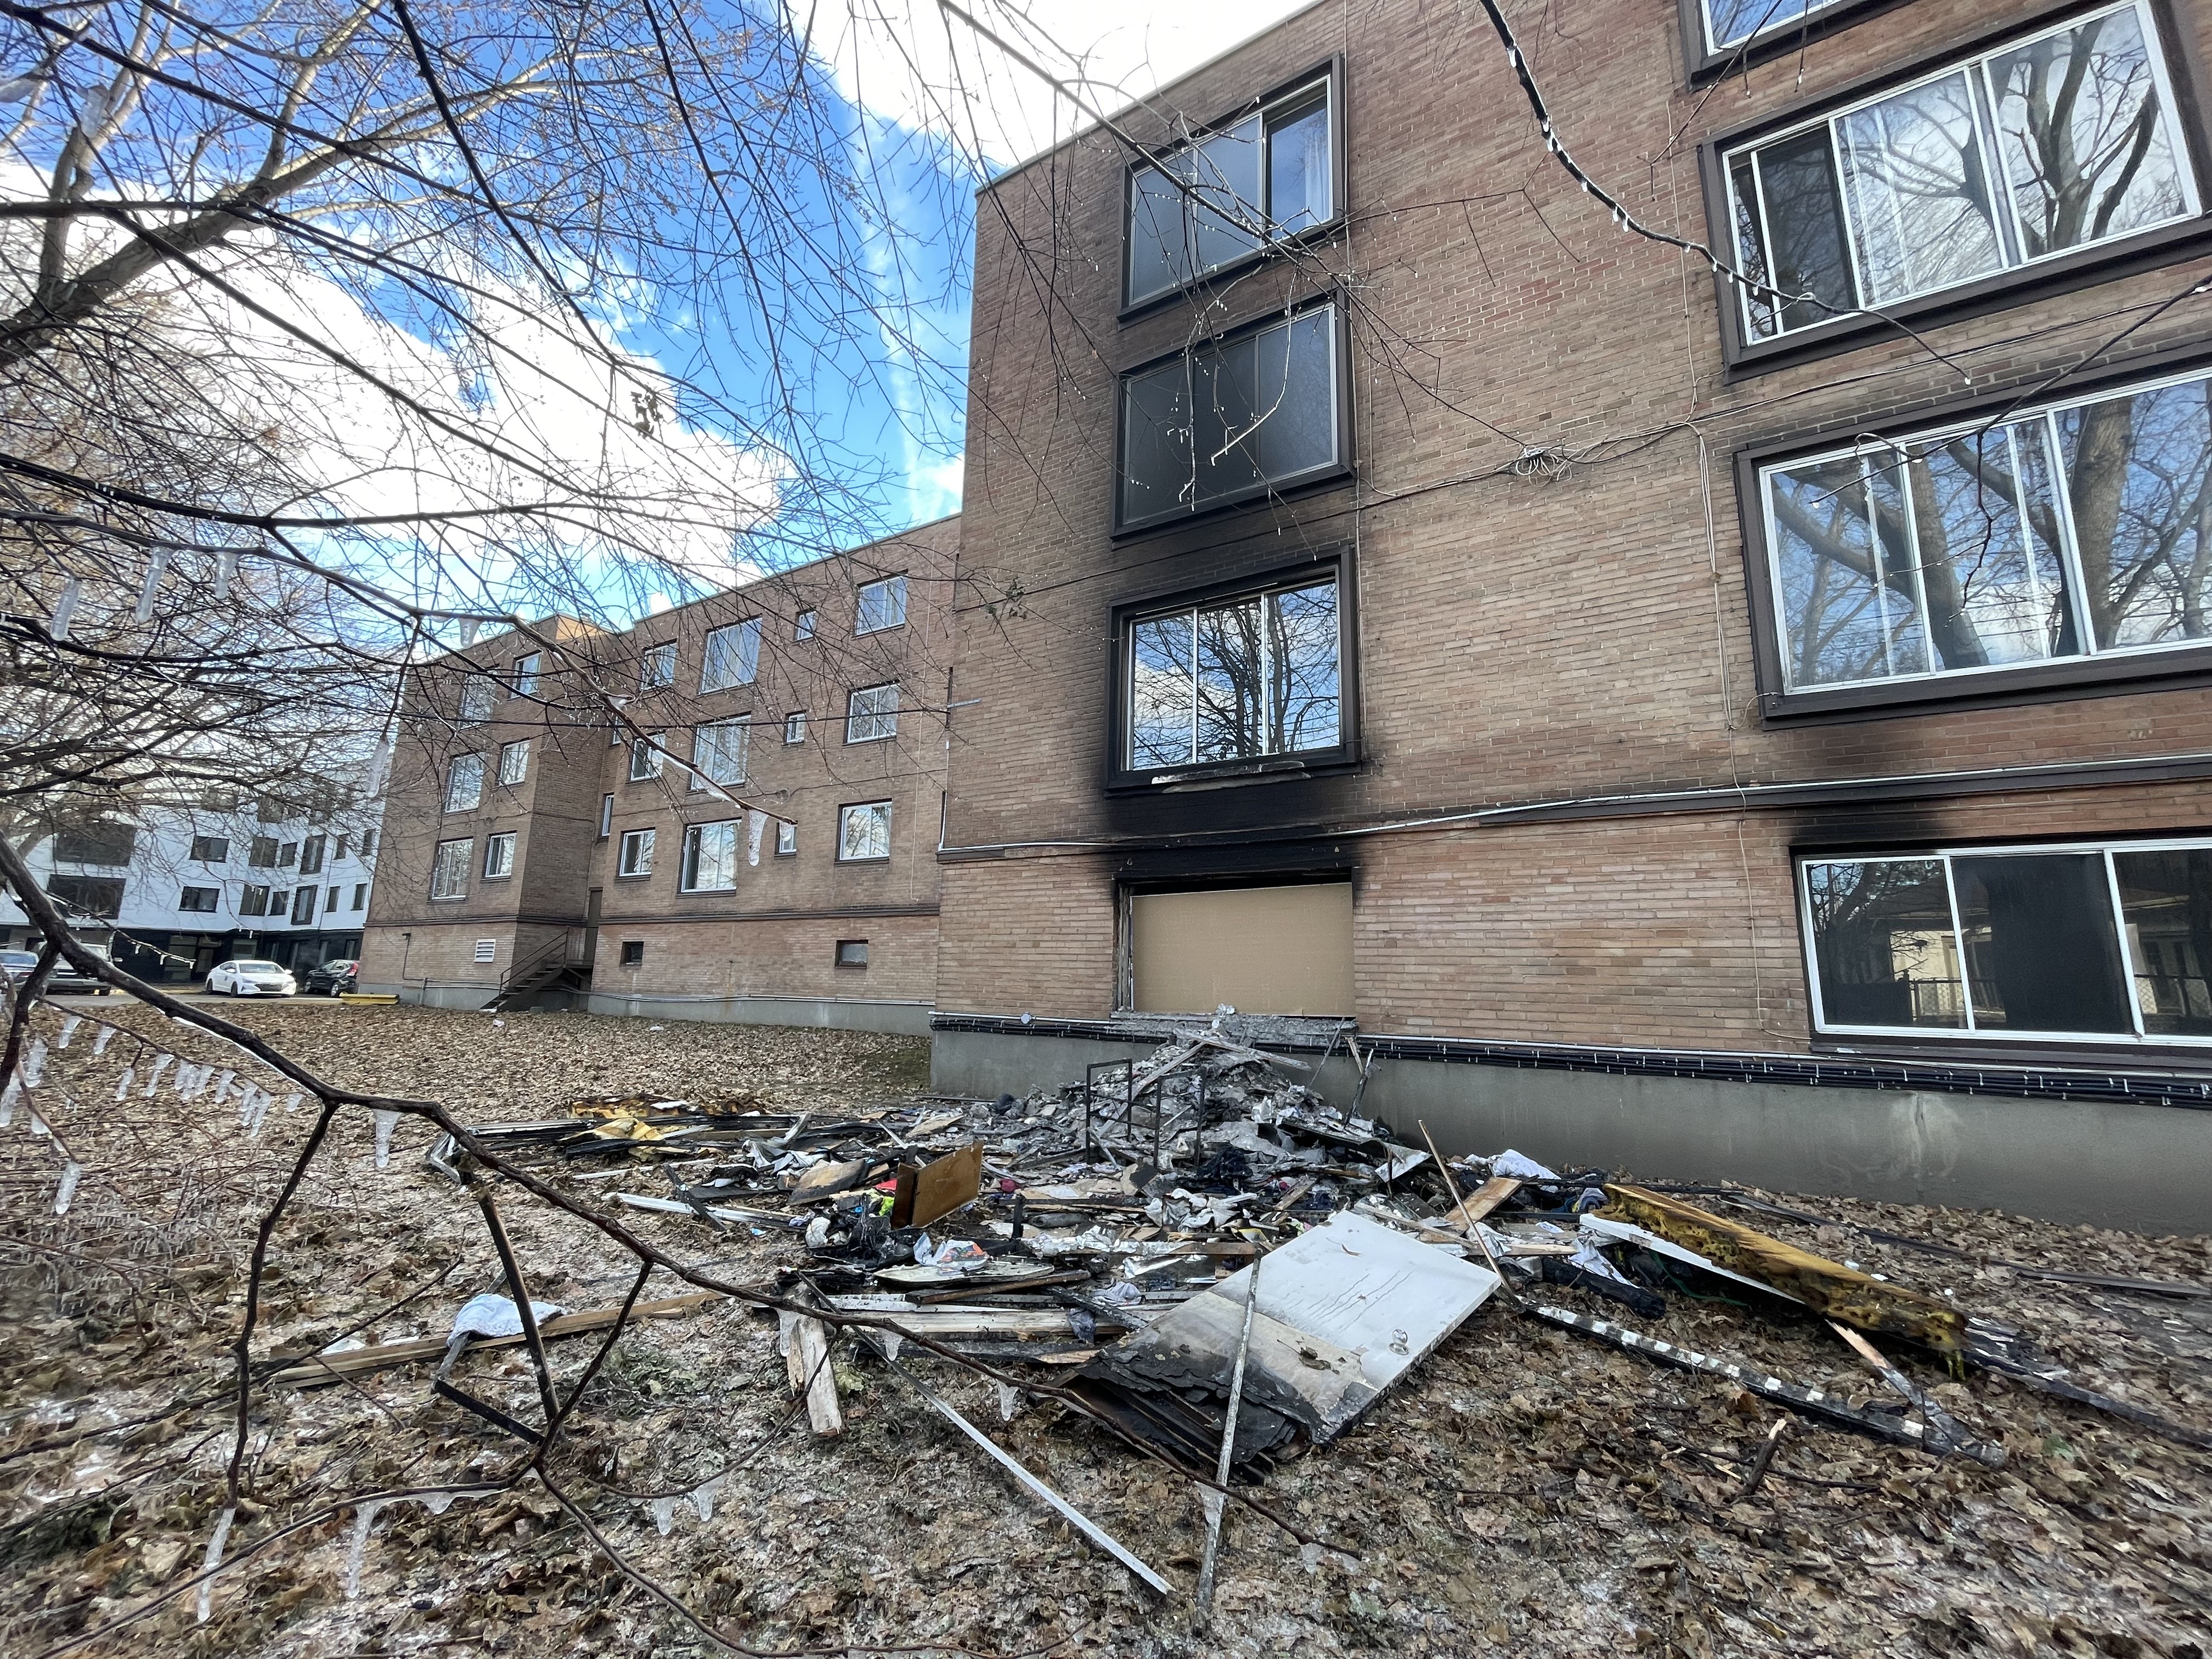 Young boy, man in critical condition after New Year’s Eve fire in Montreal’s west end